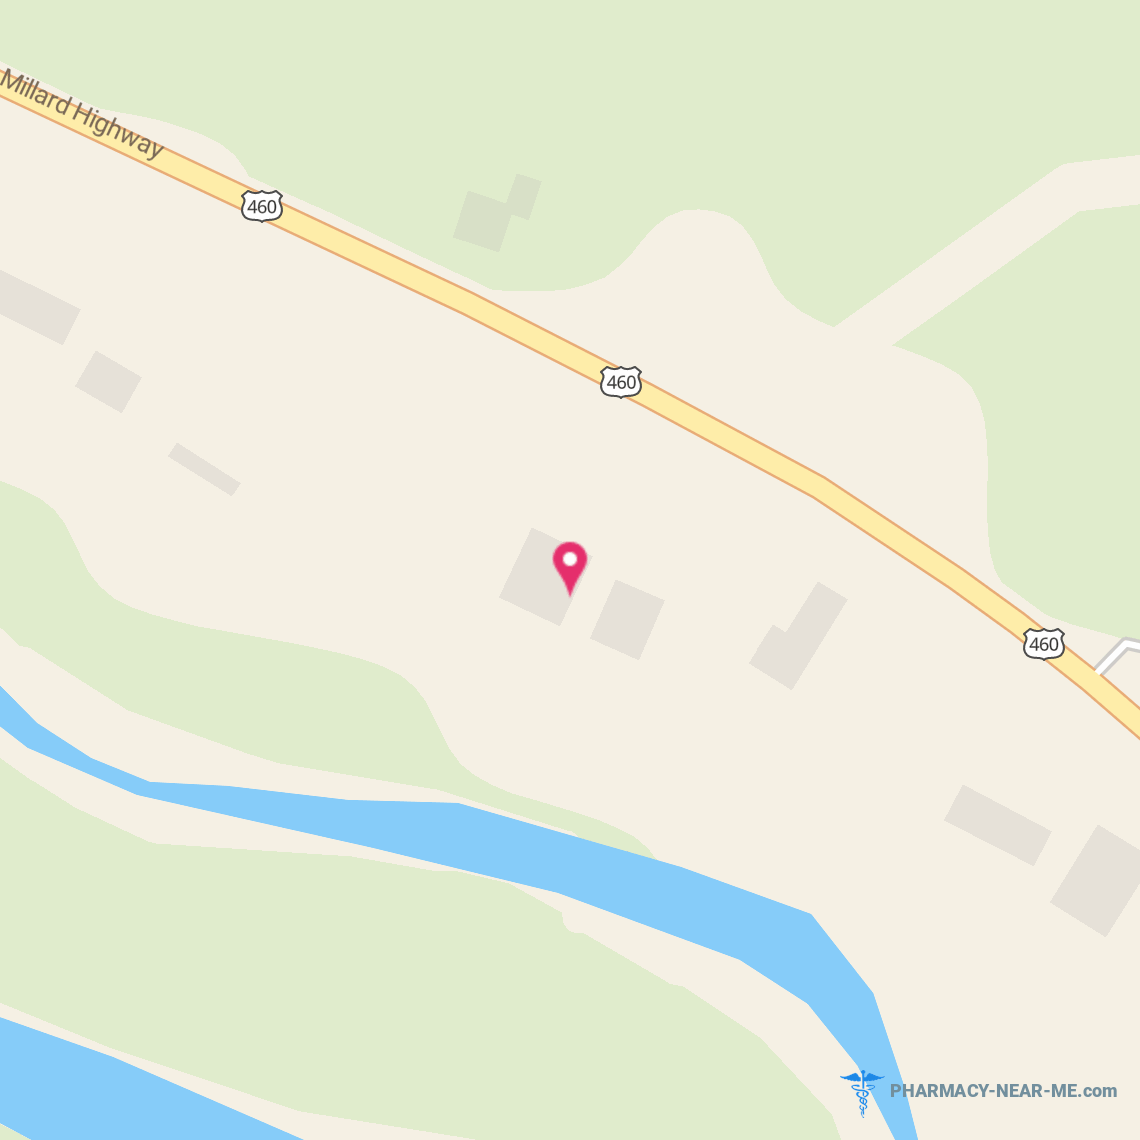 APPALACHIAN DRUG - Pharmacy Hours, Phone, Reviews & Information: 9613 Millard Highway, Pikeville, Kentucky 41501, United States